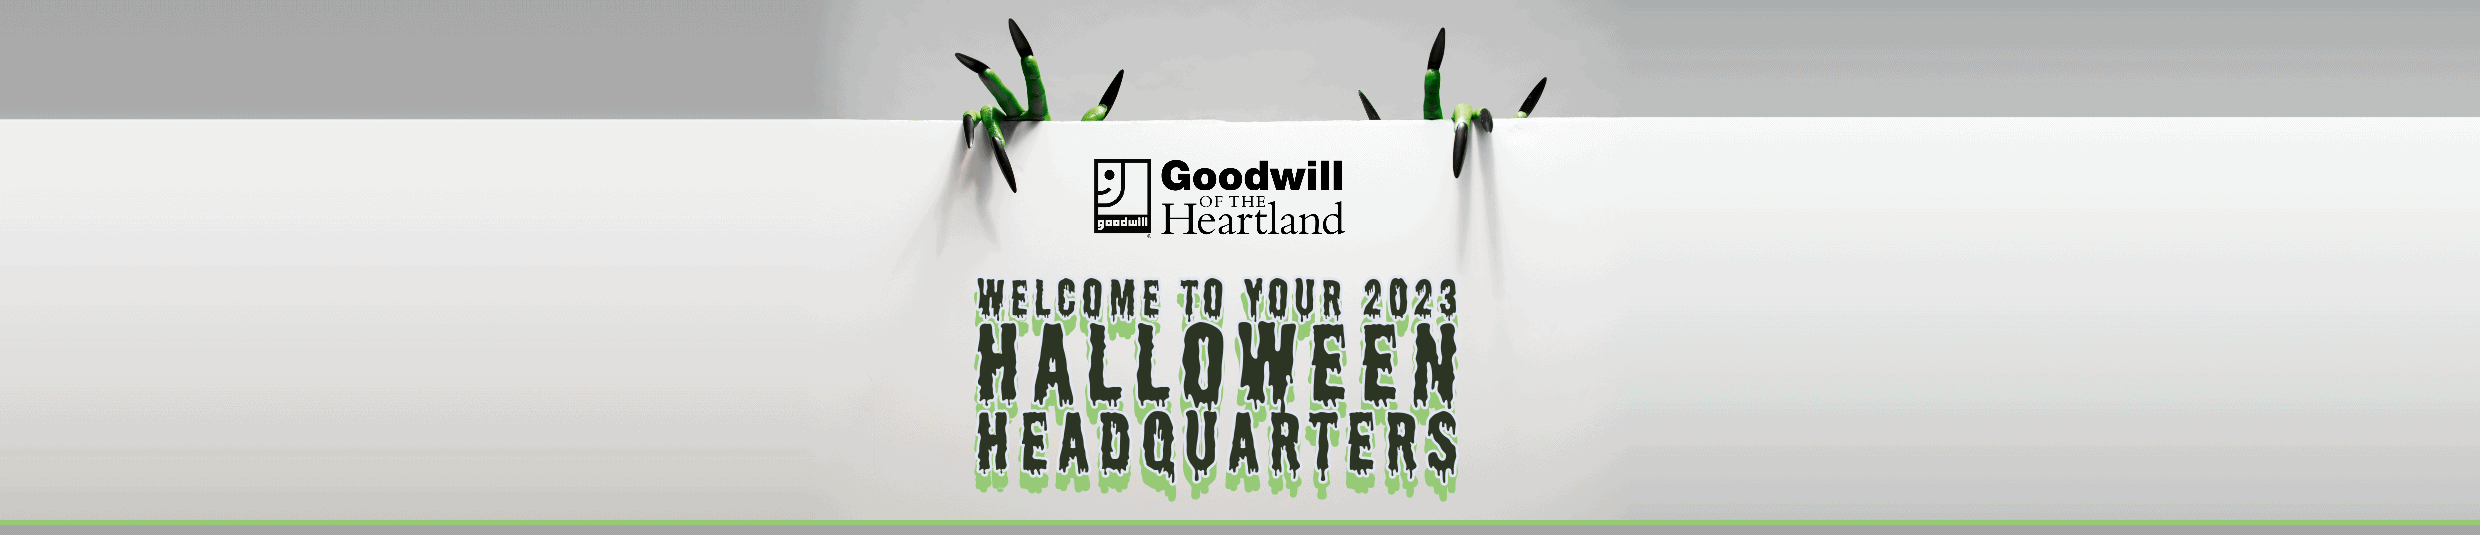 Halloween Headquarters Banner; Welcome to your 2023 Halloween Headquarters